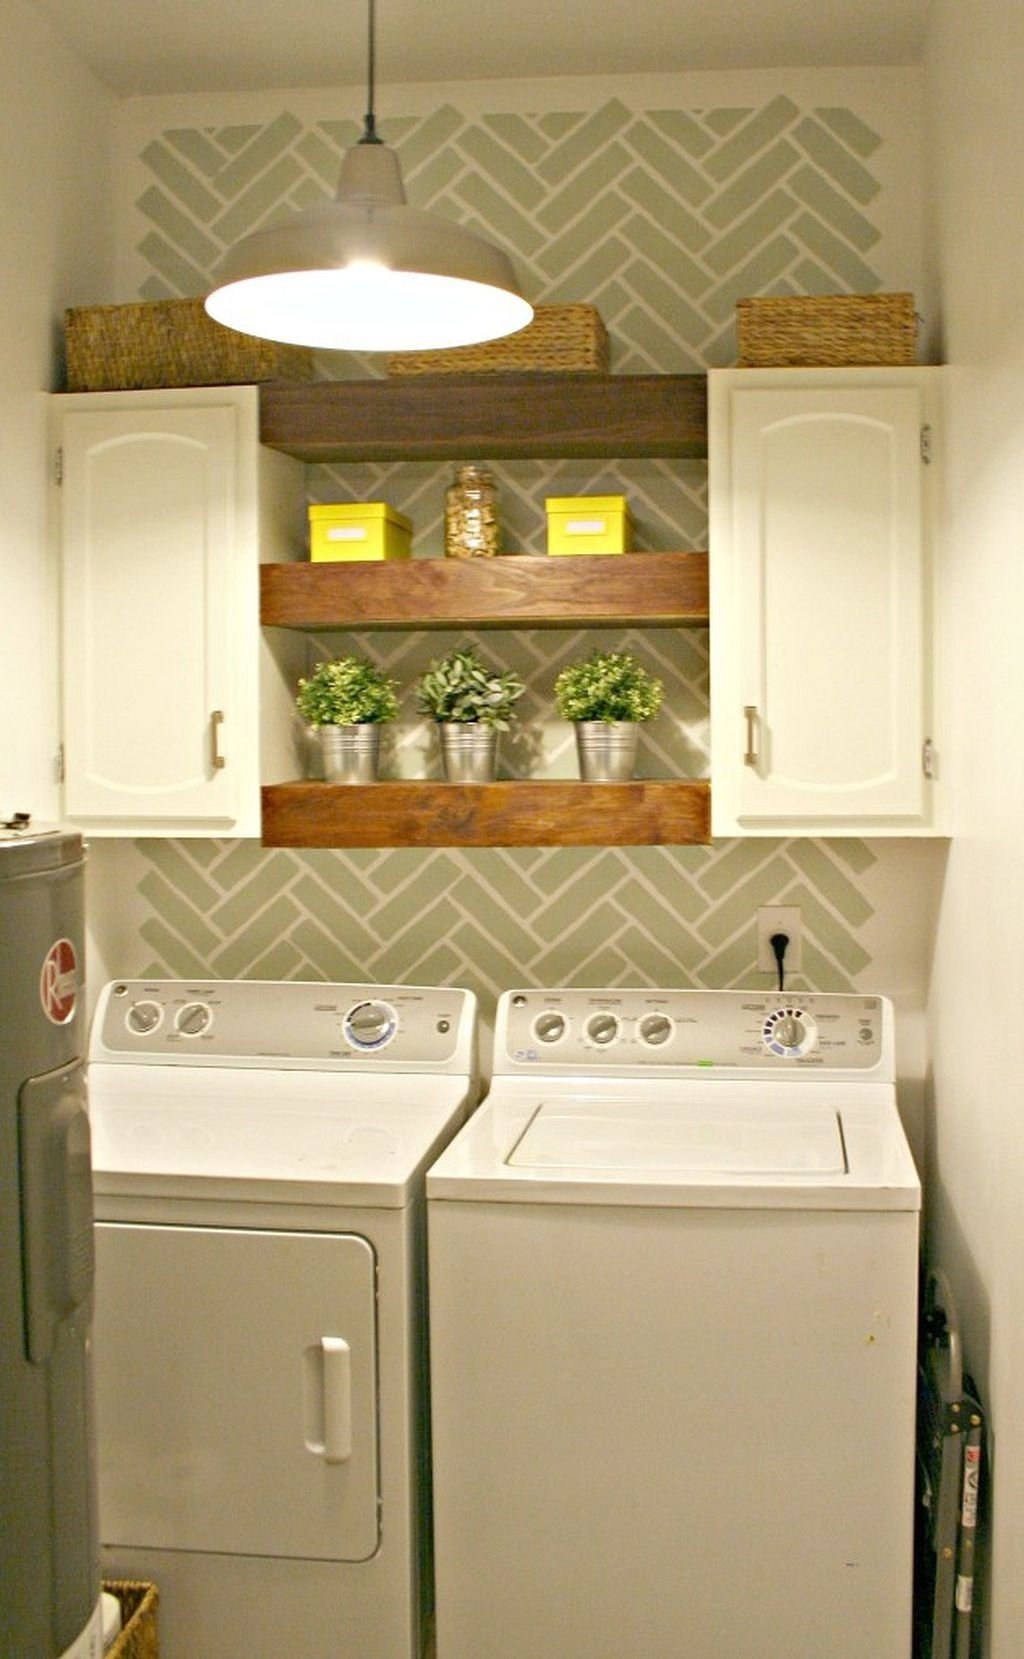 10 Unique Laundry Room Ideas Small Spaces 64 tiny space laundry room storage ideas laundry room organization 2 2022